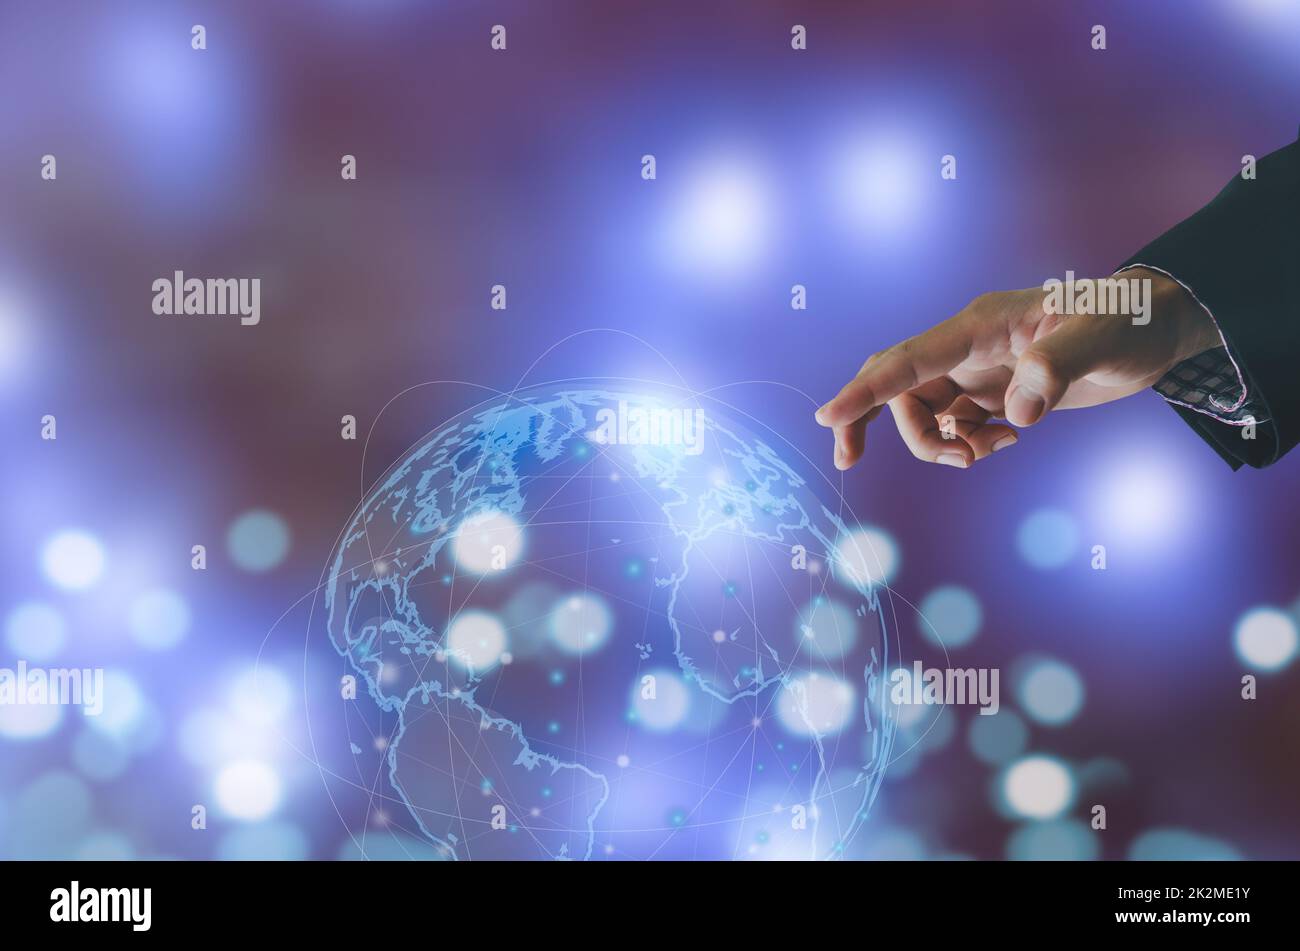 Businessman hand touching global network connecting the modern technology using the investment in the Internet network. Stock Photo